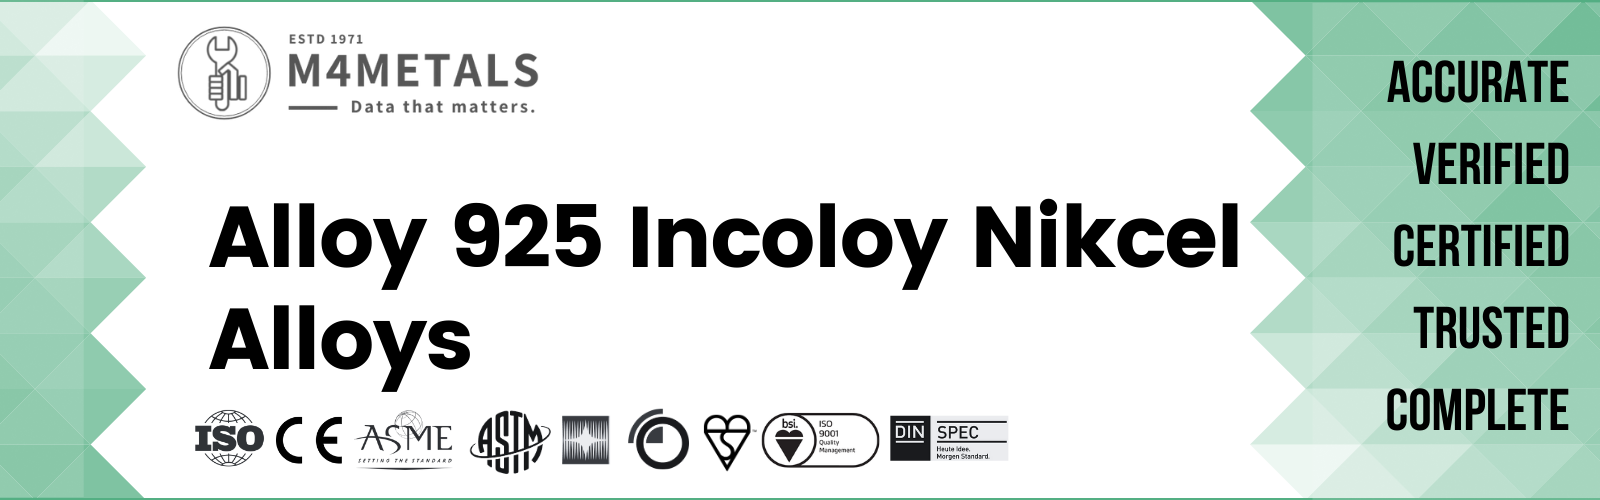 Incoloy Alloy 925